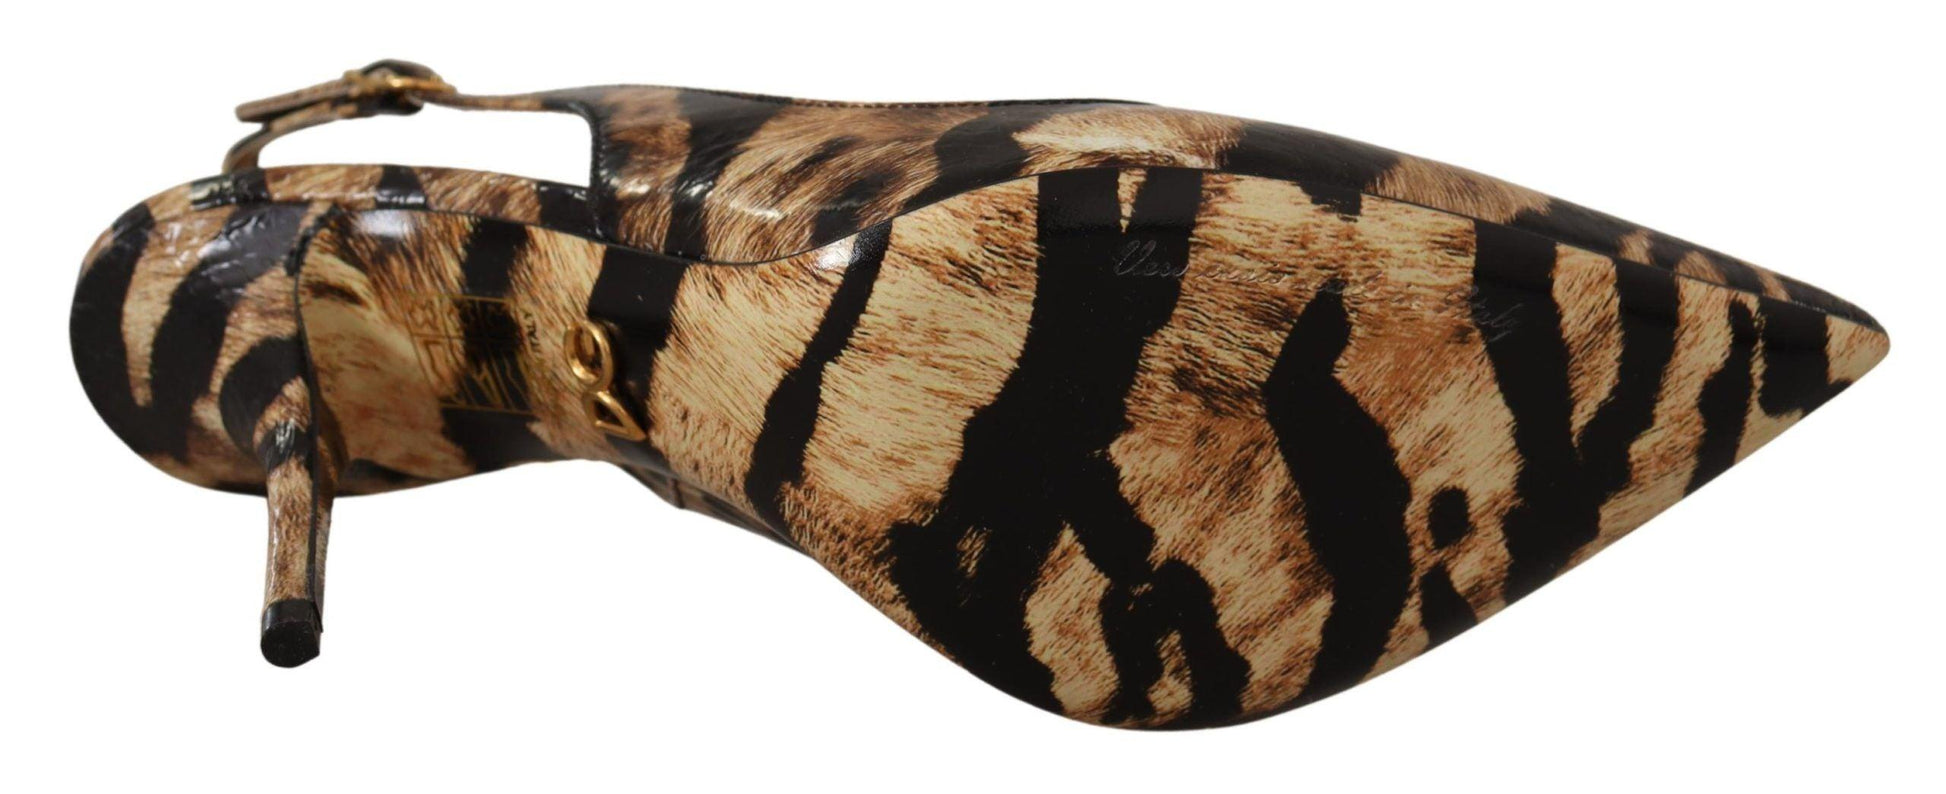 Dolce & Gabbana Brown Slingbacks Leather Tiger Shoes - Designed by Dolce & Gabbana Available to Buy at a Discounted Price on Moon Behind The Hill Online Designer Discount Store